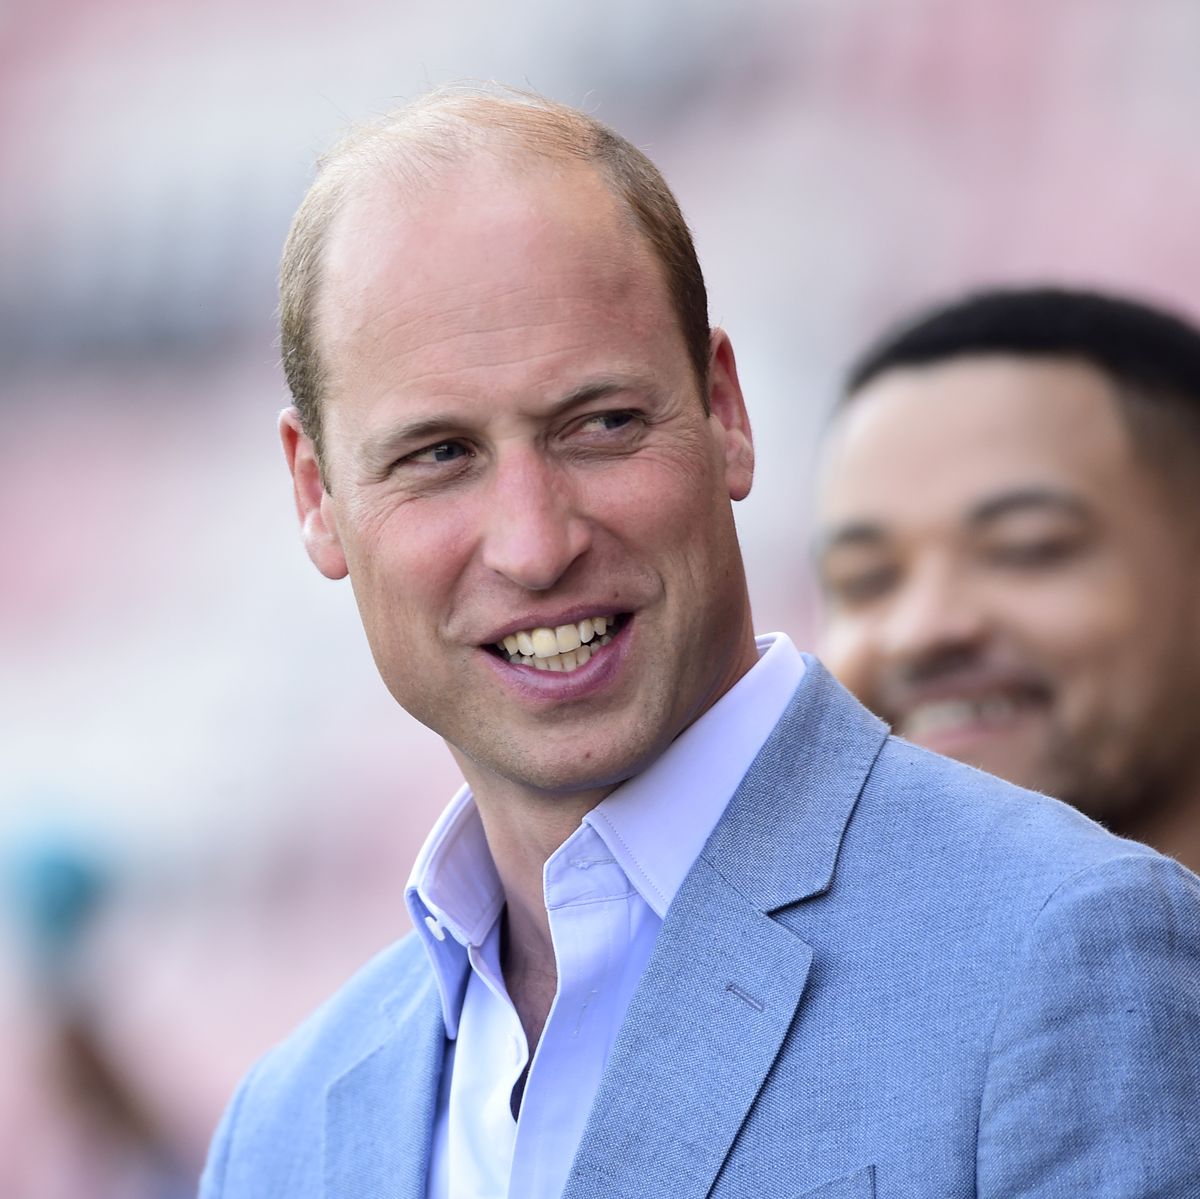 Prince William’s Cold Shoulder To Prince Harry Before Queen Elizabeth II’s Passing